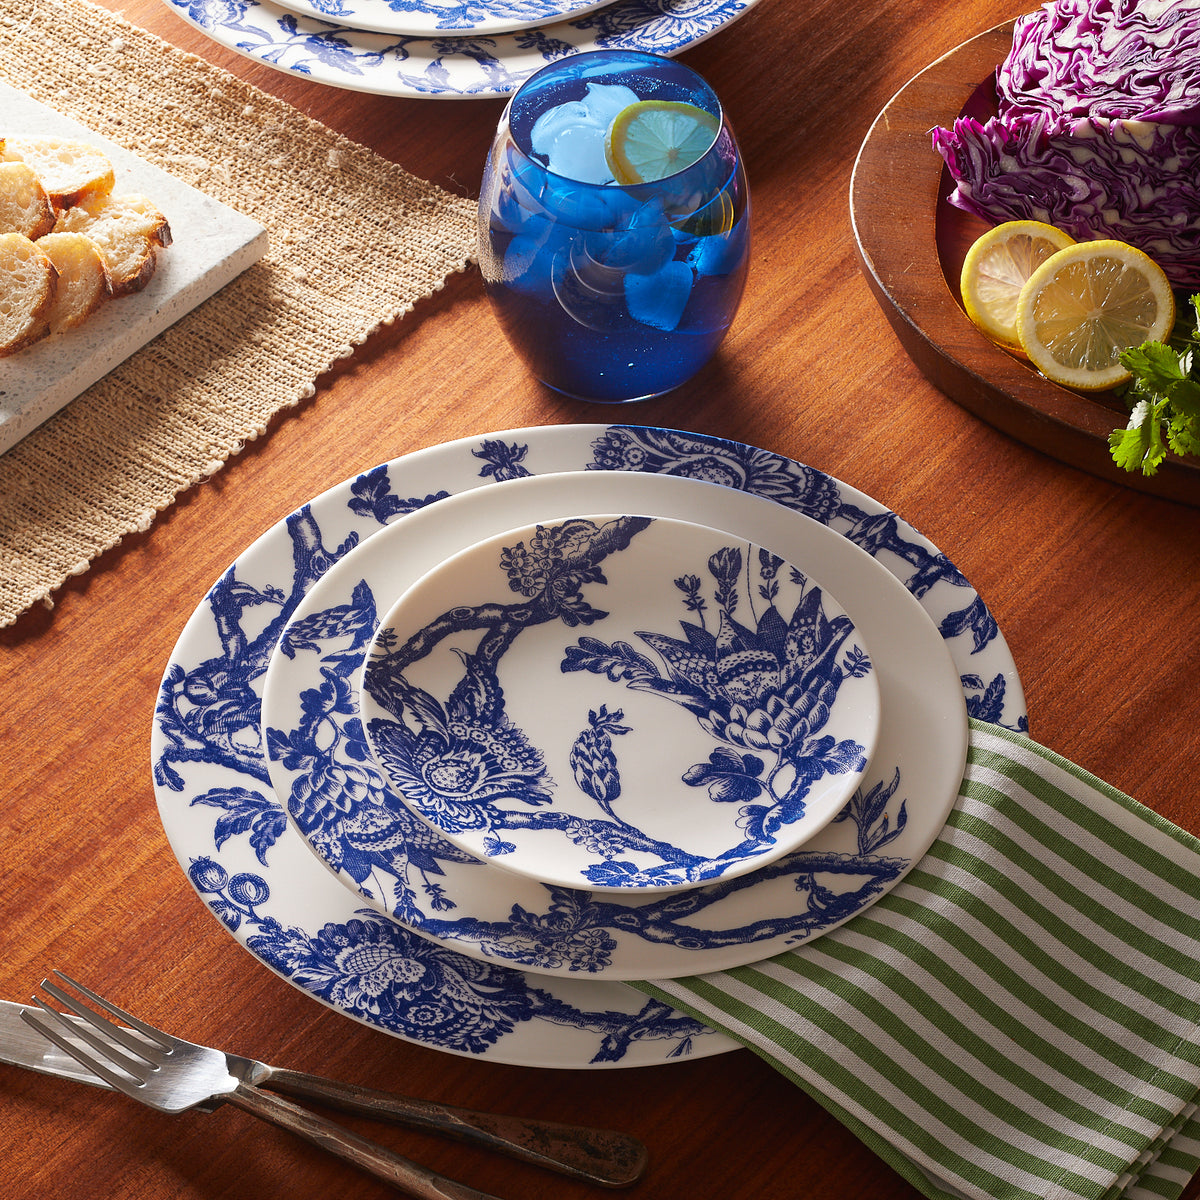 An Arcadia Blue Rimmed Dinner Plate, delicately decorated in blue and white, displayed on a rustic wooden table, from the Caskata Artisanal Home brand.